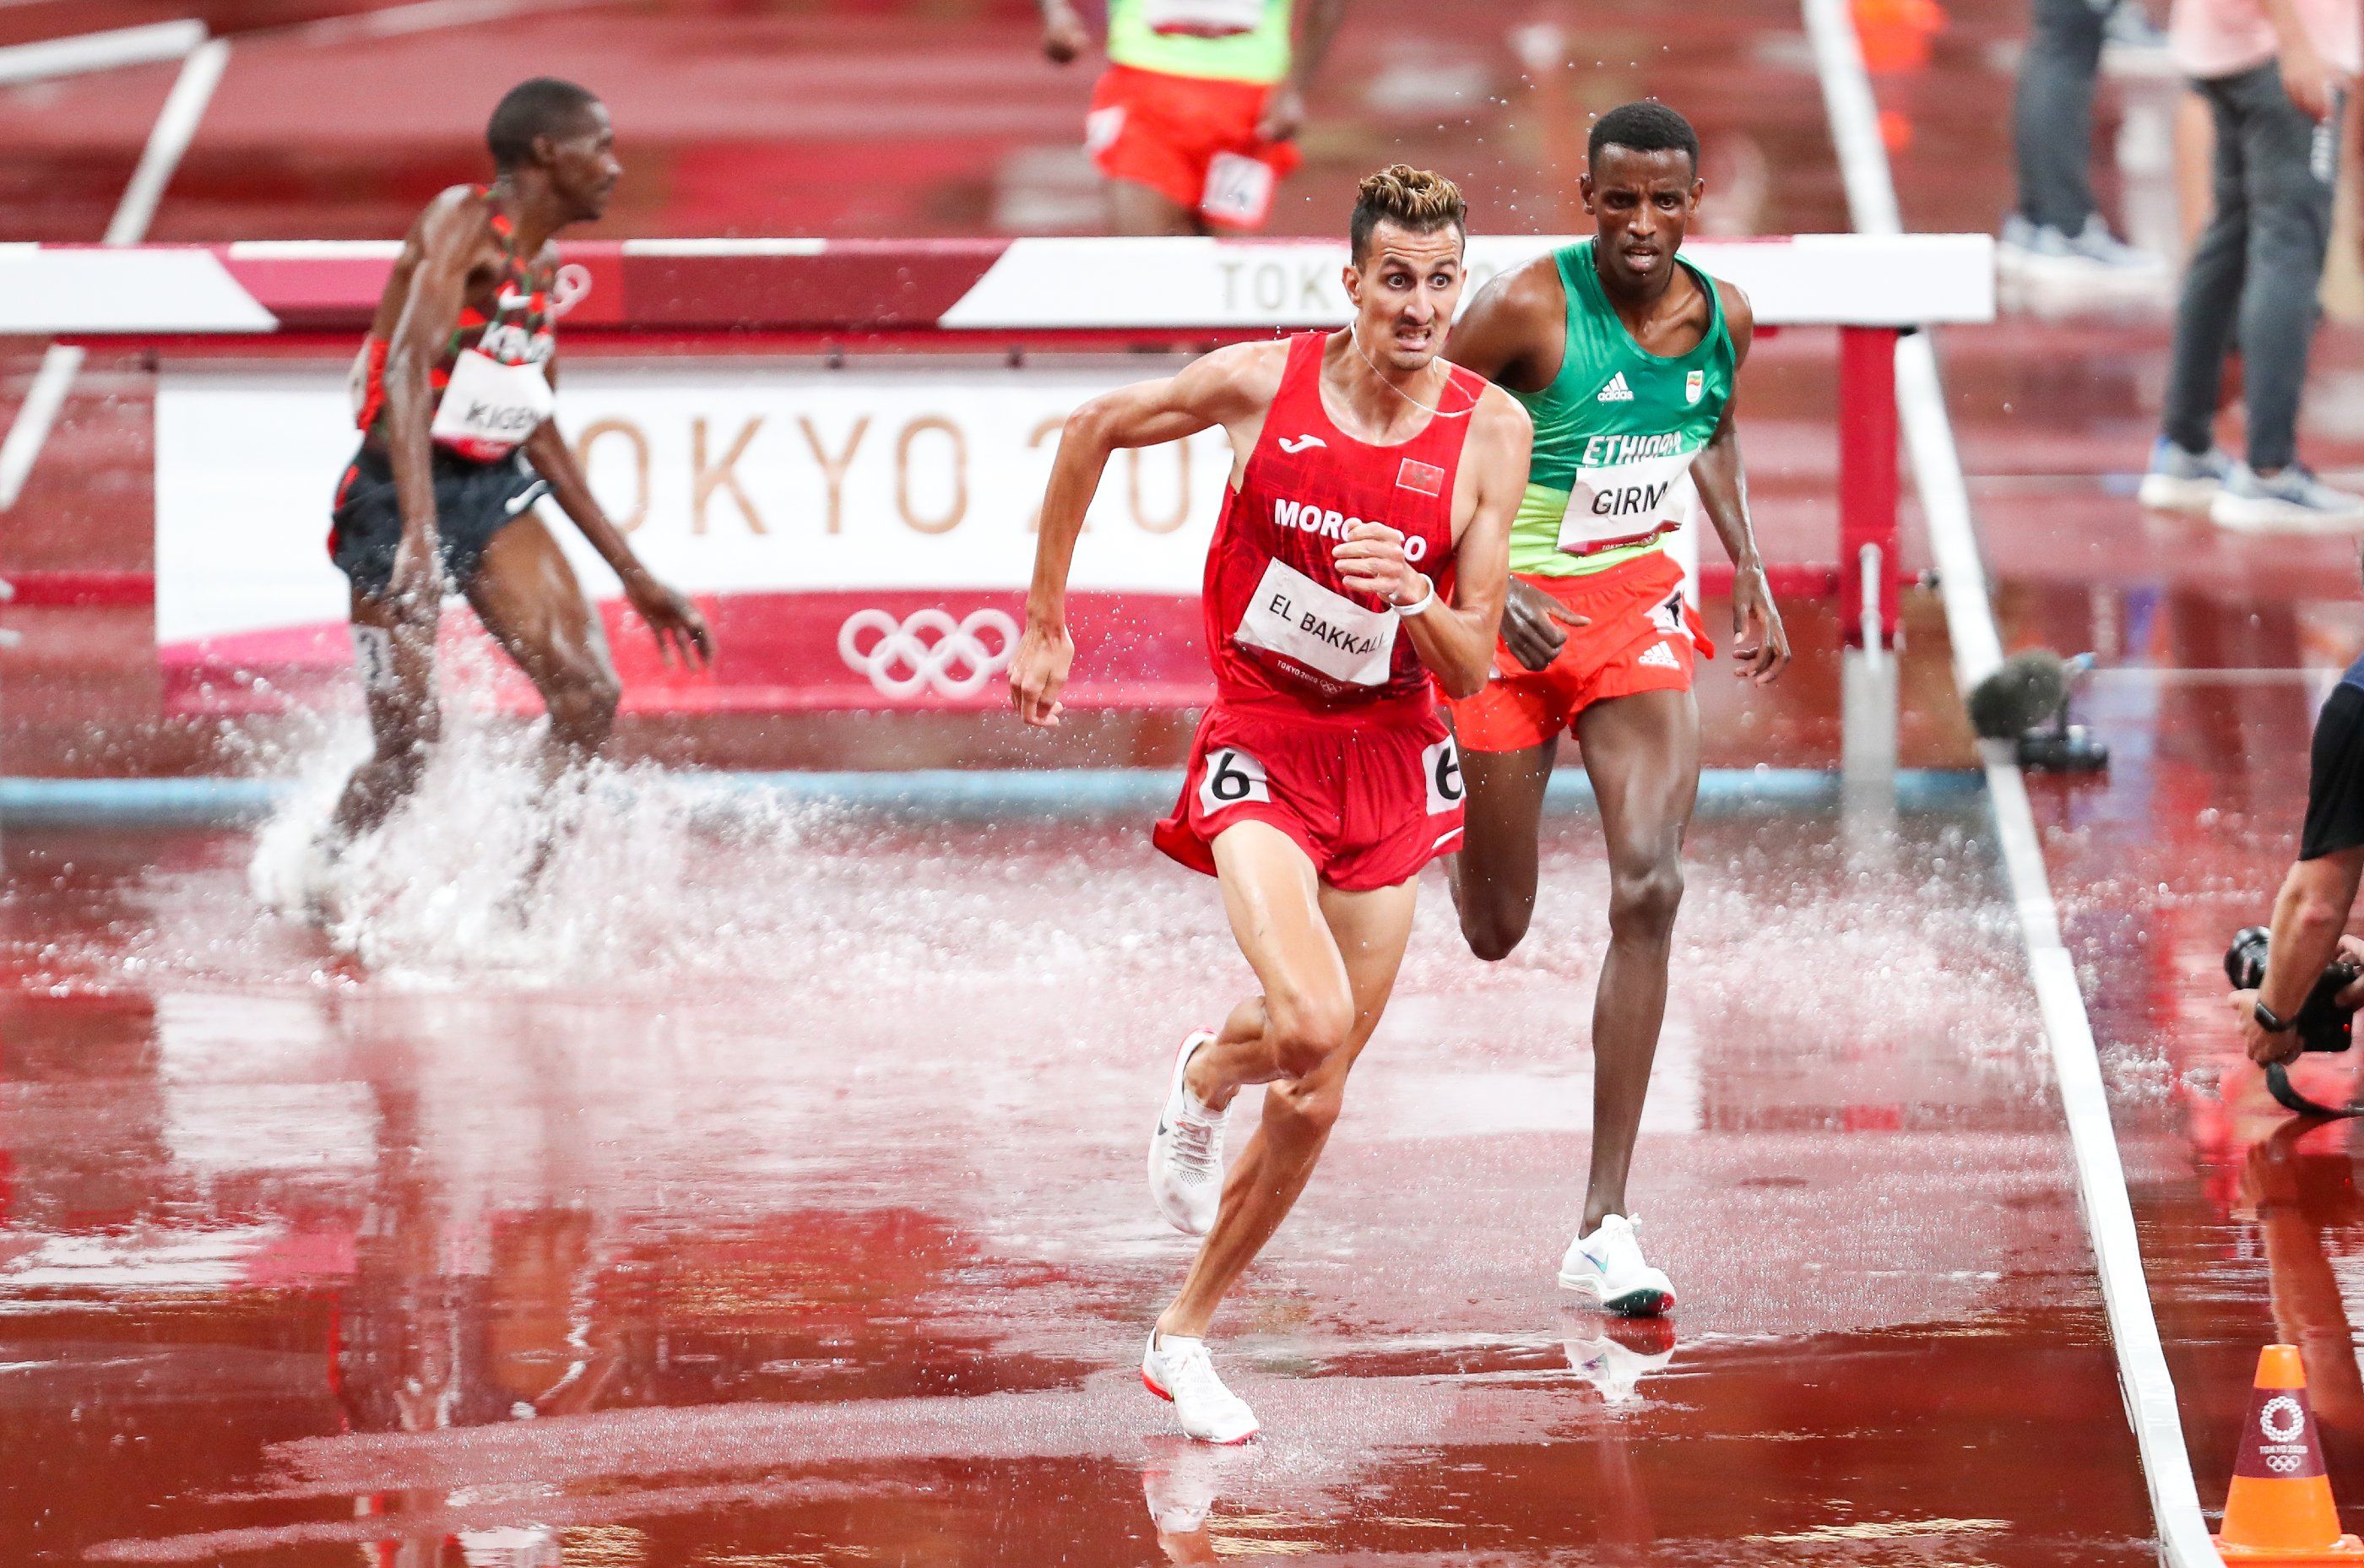 Soufiane El Bakkali on his way to Olympic 3000m steeplechase gold